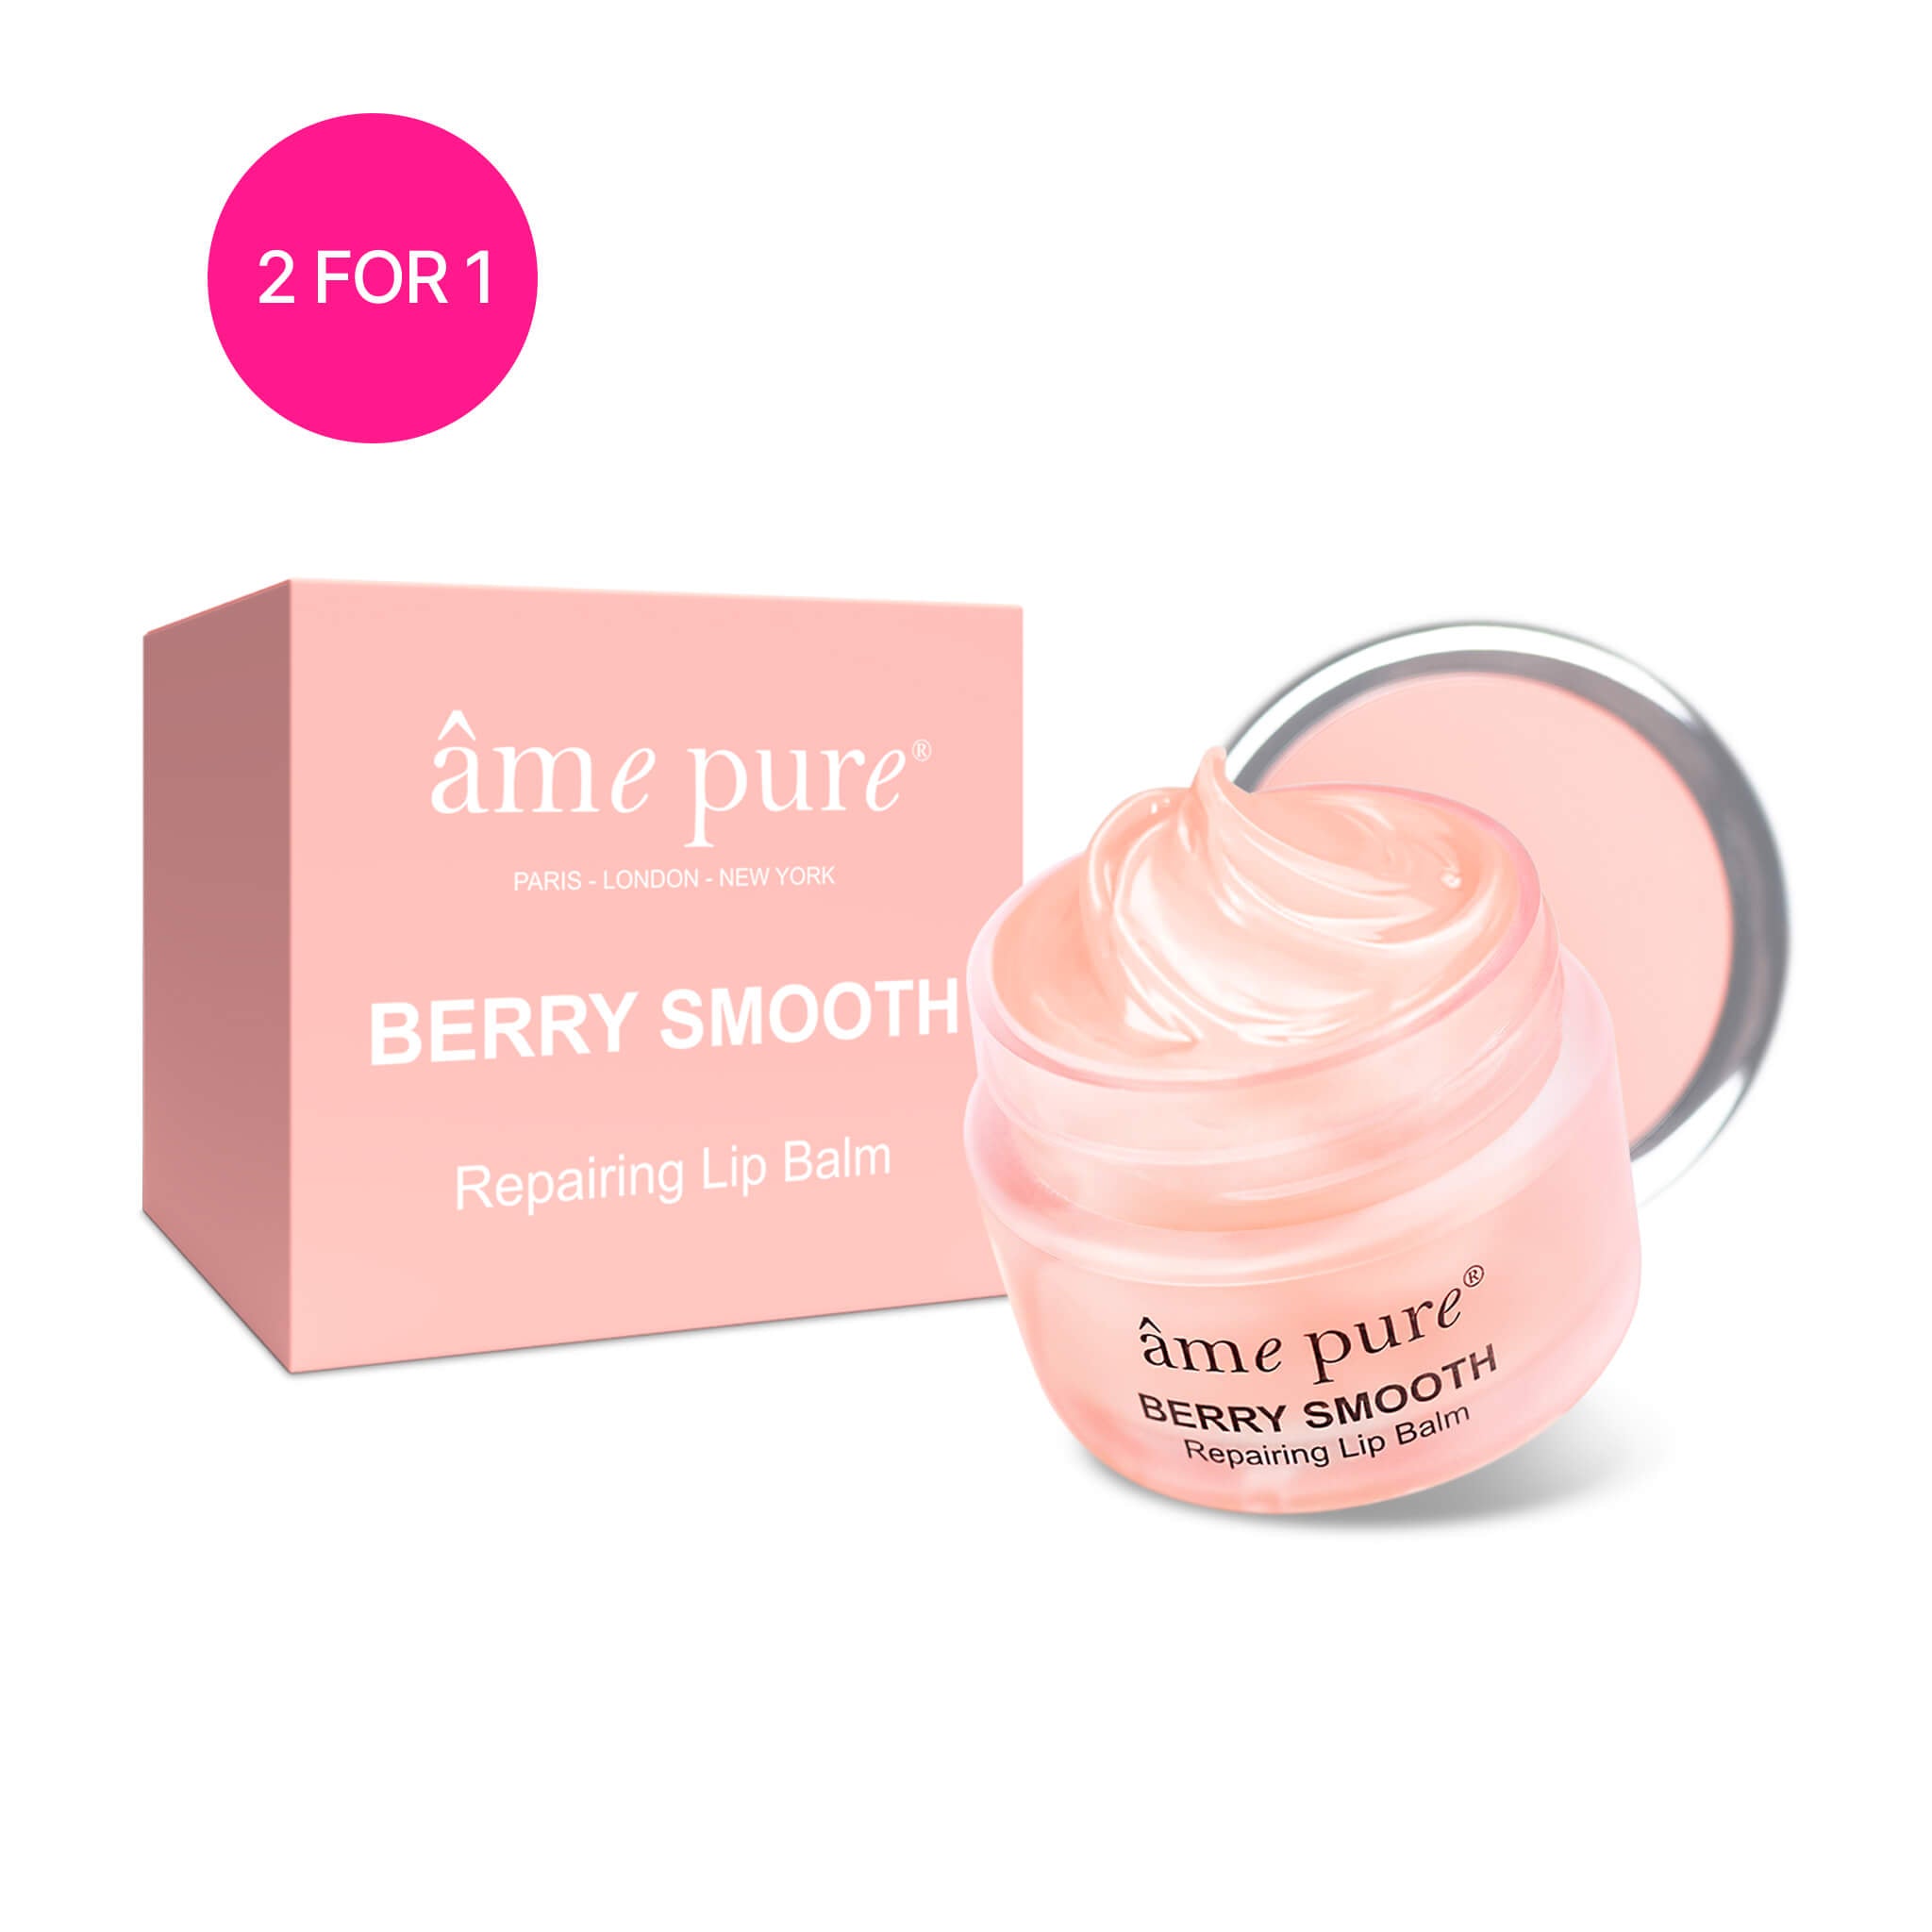 BERRY SMOOTH Lip balm | Buy 1 Get 1 Free